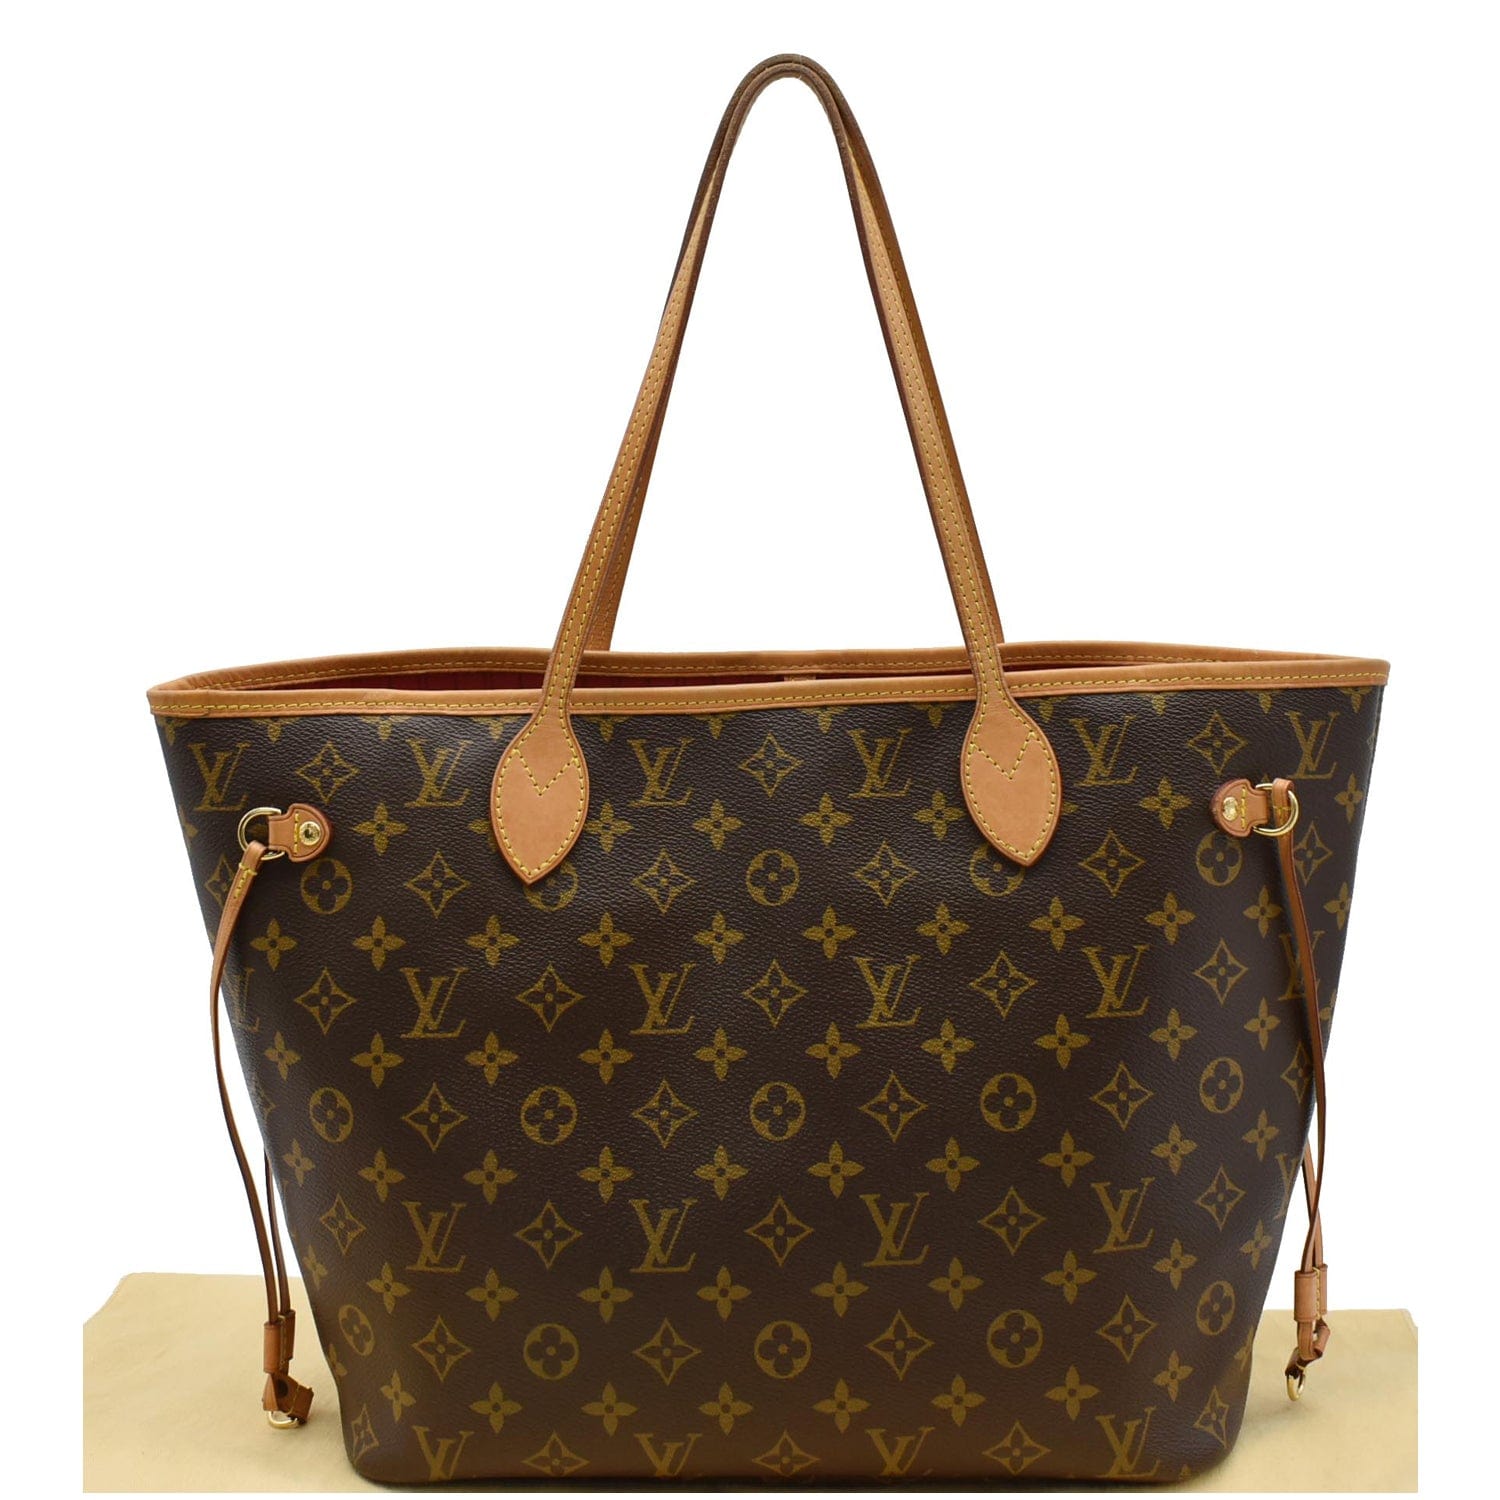 Other, Louis Vuitton Heavy Duty Bag In Chocolate Color Writing In Darker  Brown